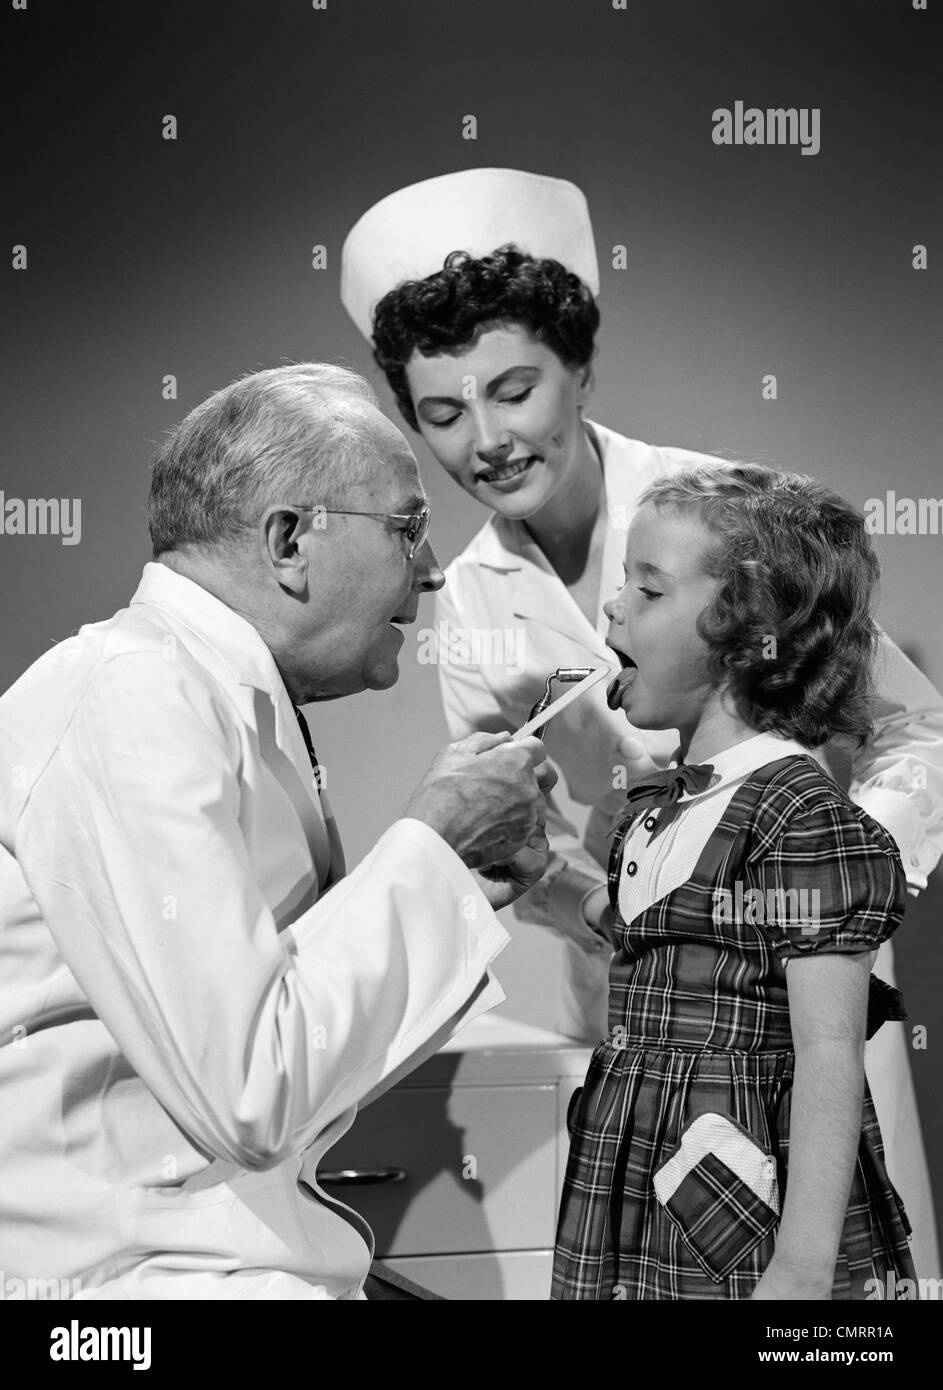 1950s DOCTOR EXAMINING MOUTH OF LITTLE GIRL WITH TONGUE DEPRESSOR WHILE NURSE IS LOOKING ON Stock Photo